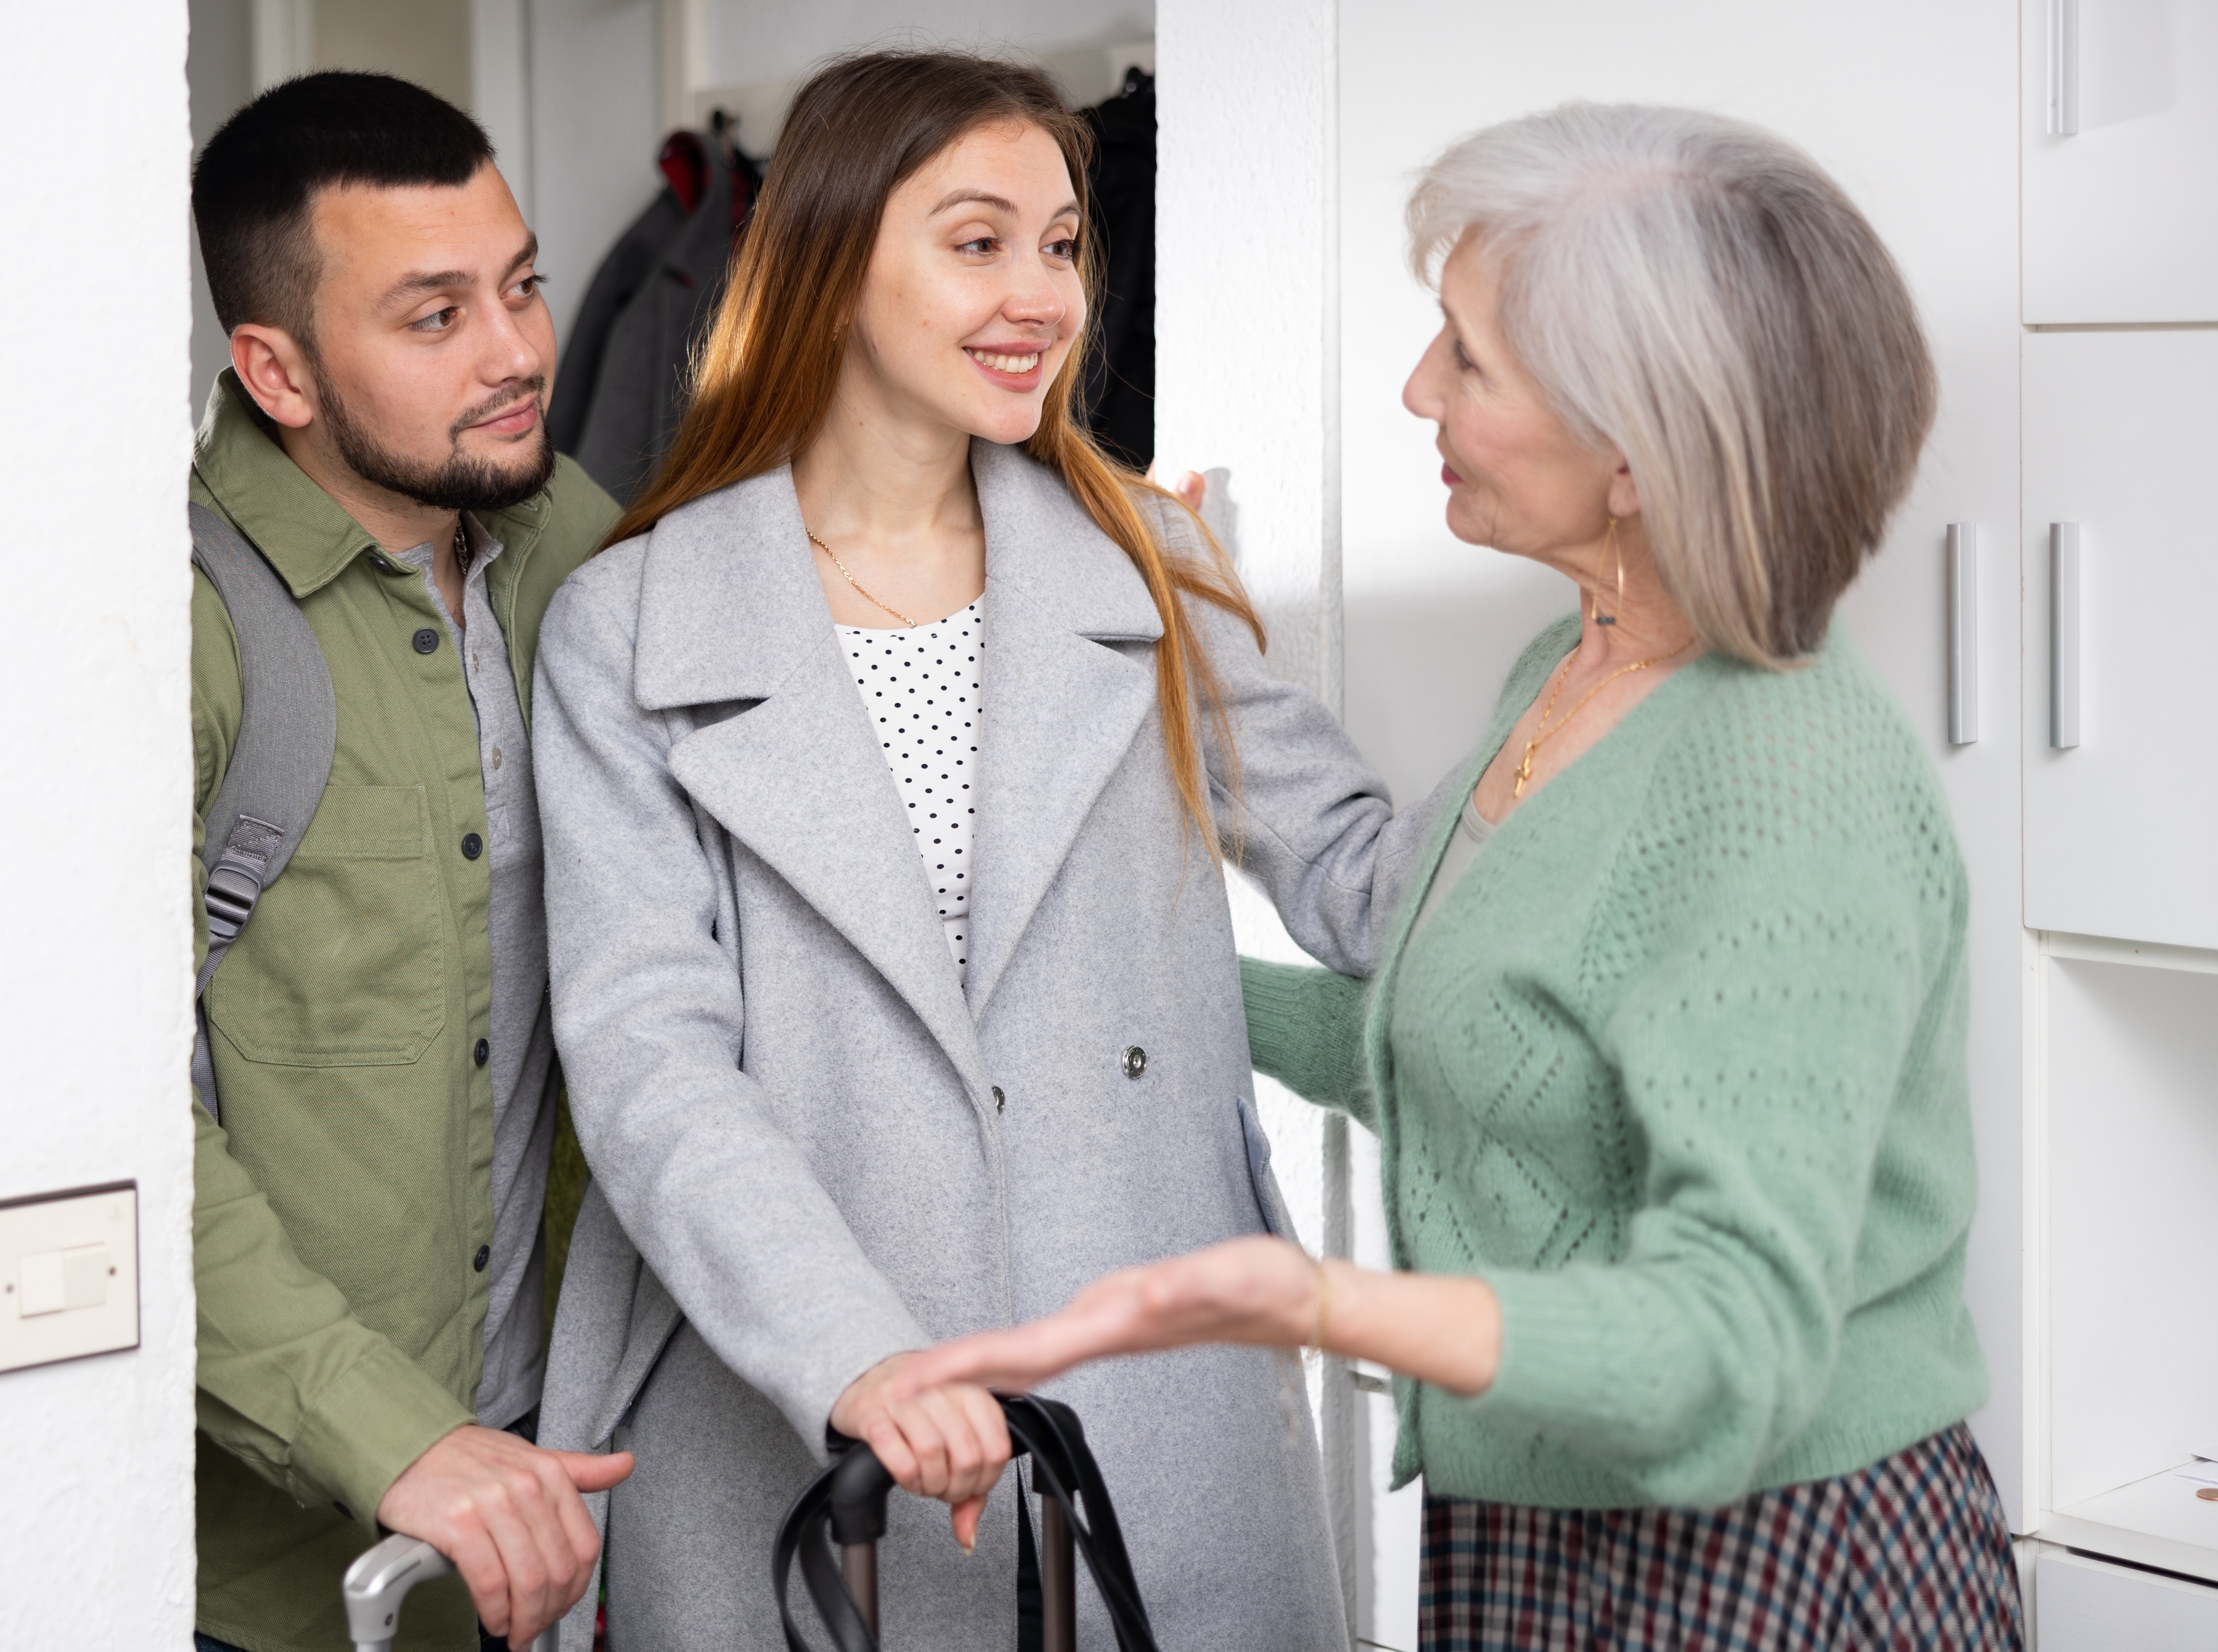 An older woman welcomes her son with his girlfriend | Source: Shutterstock